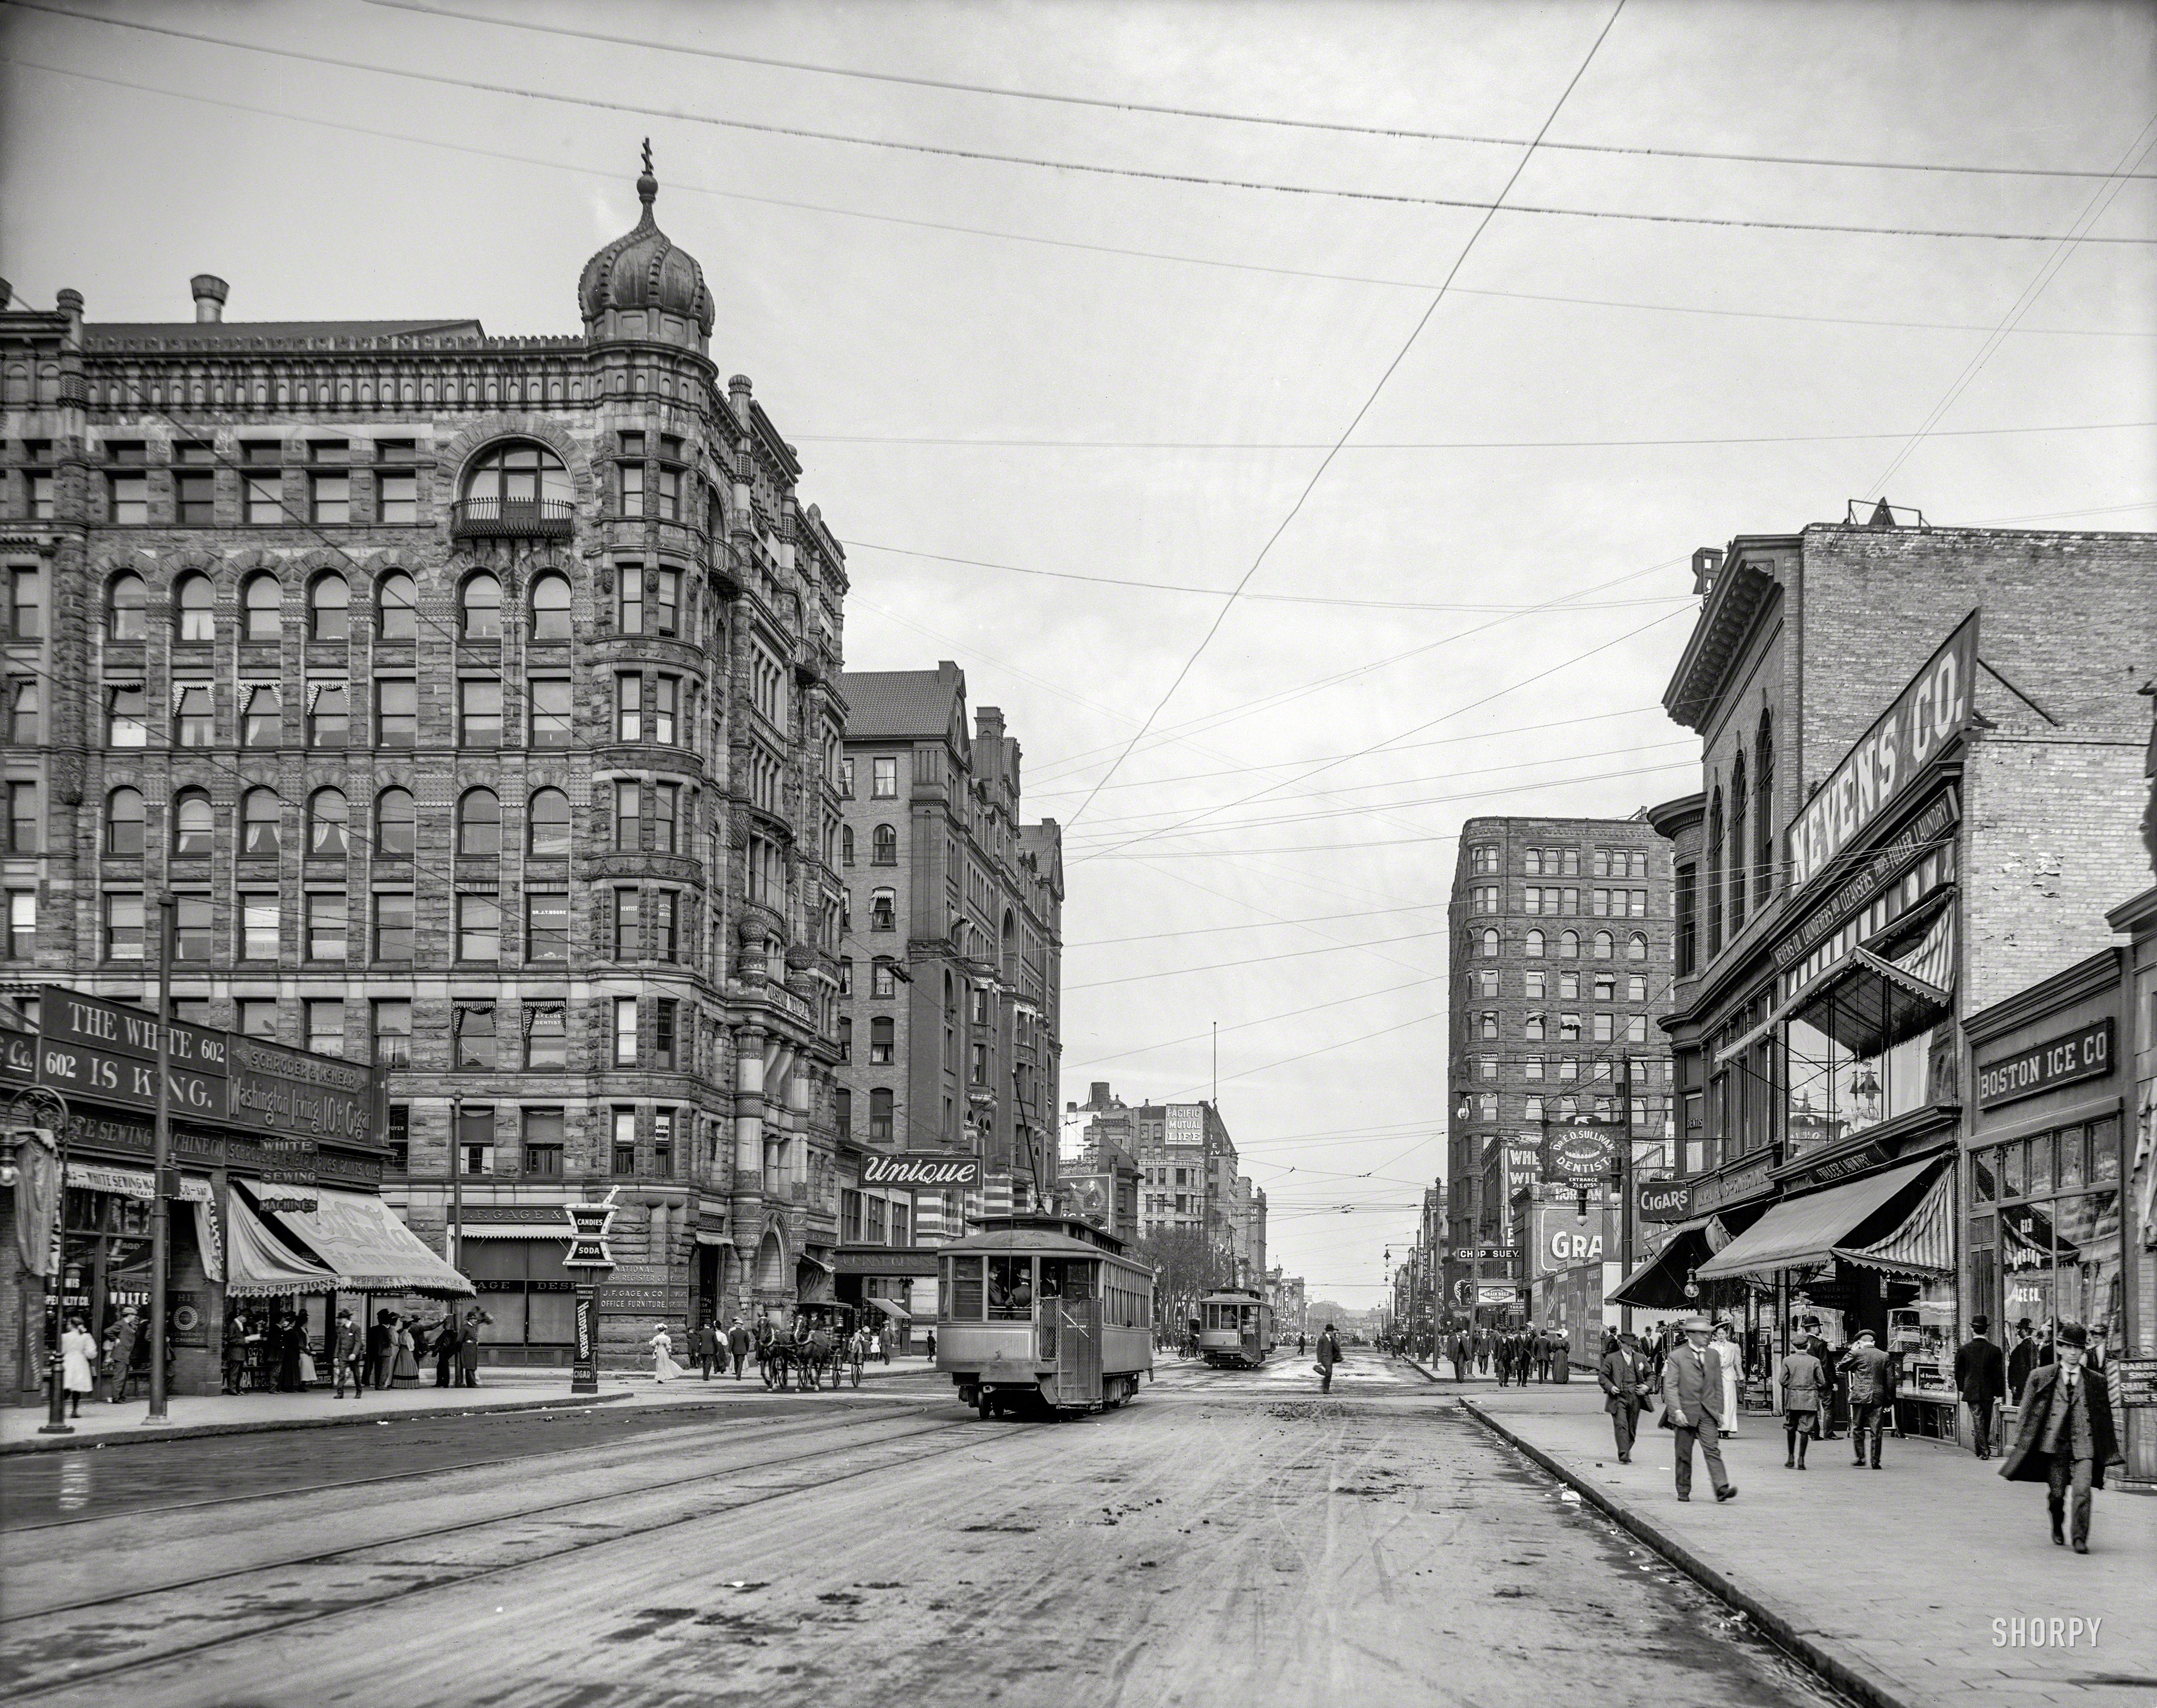 Circa 1908. "Hennepin Avenue, Minneapolis." Our title comes from the sign over the White Sewing Machine Co. store. 8x10 inch glass negative. View full size.